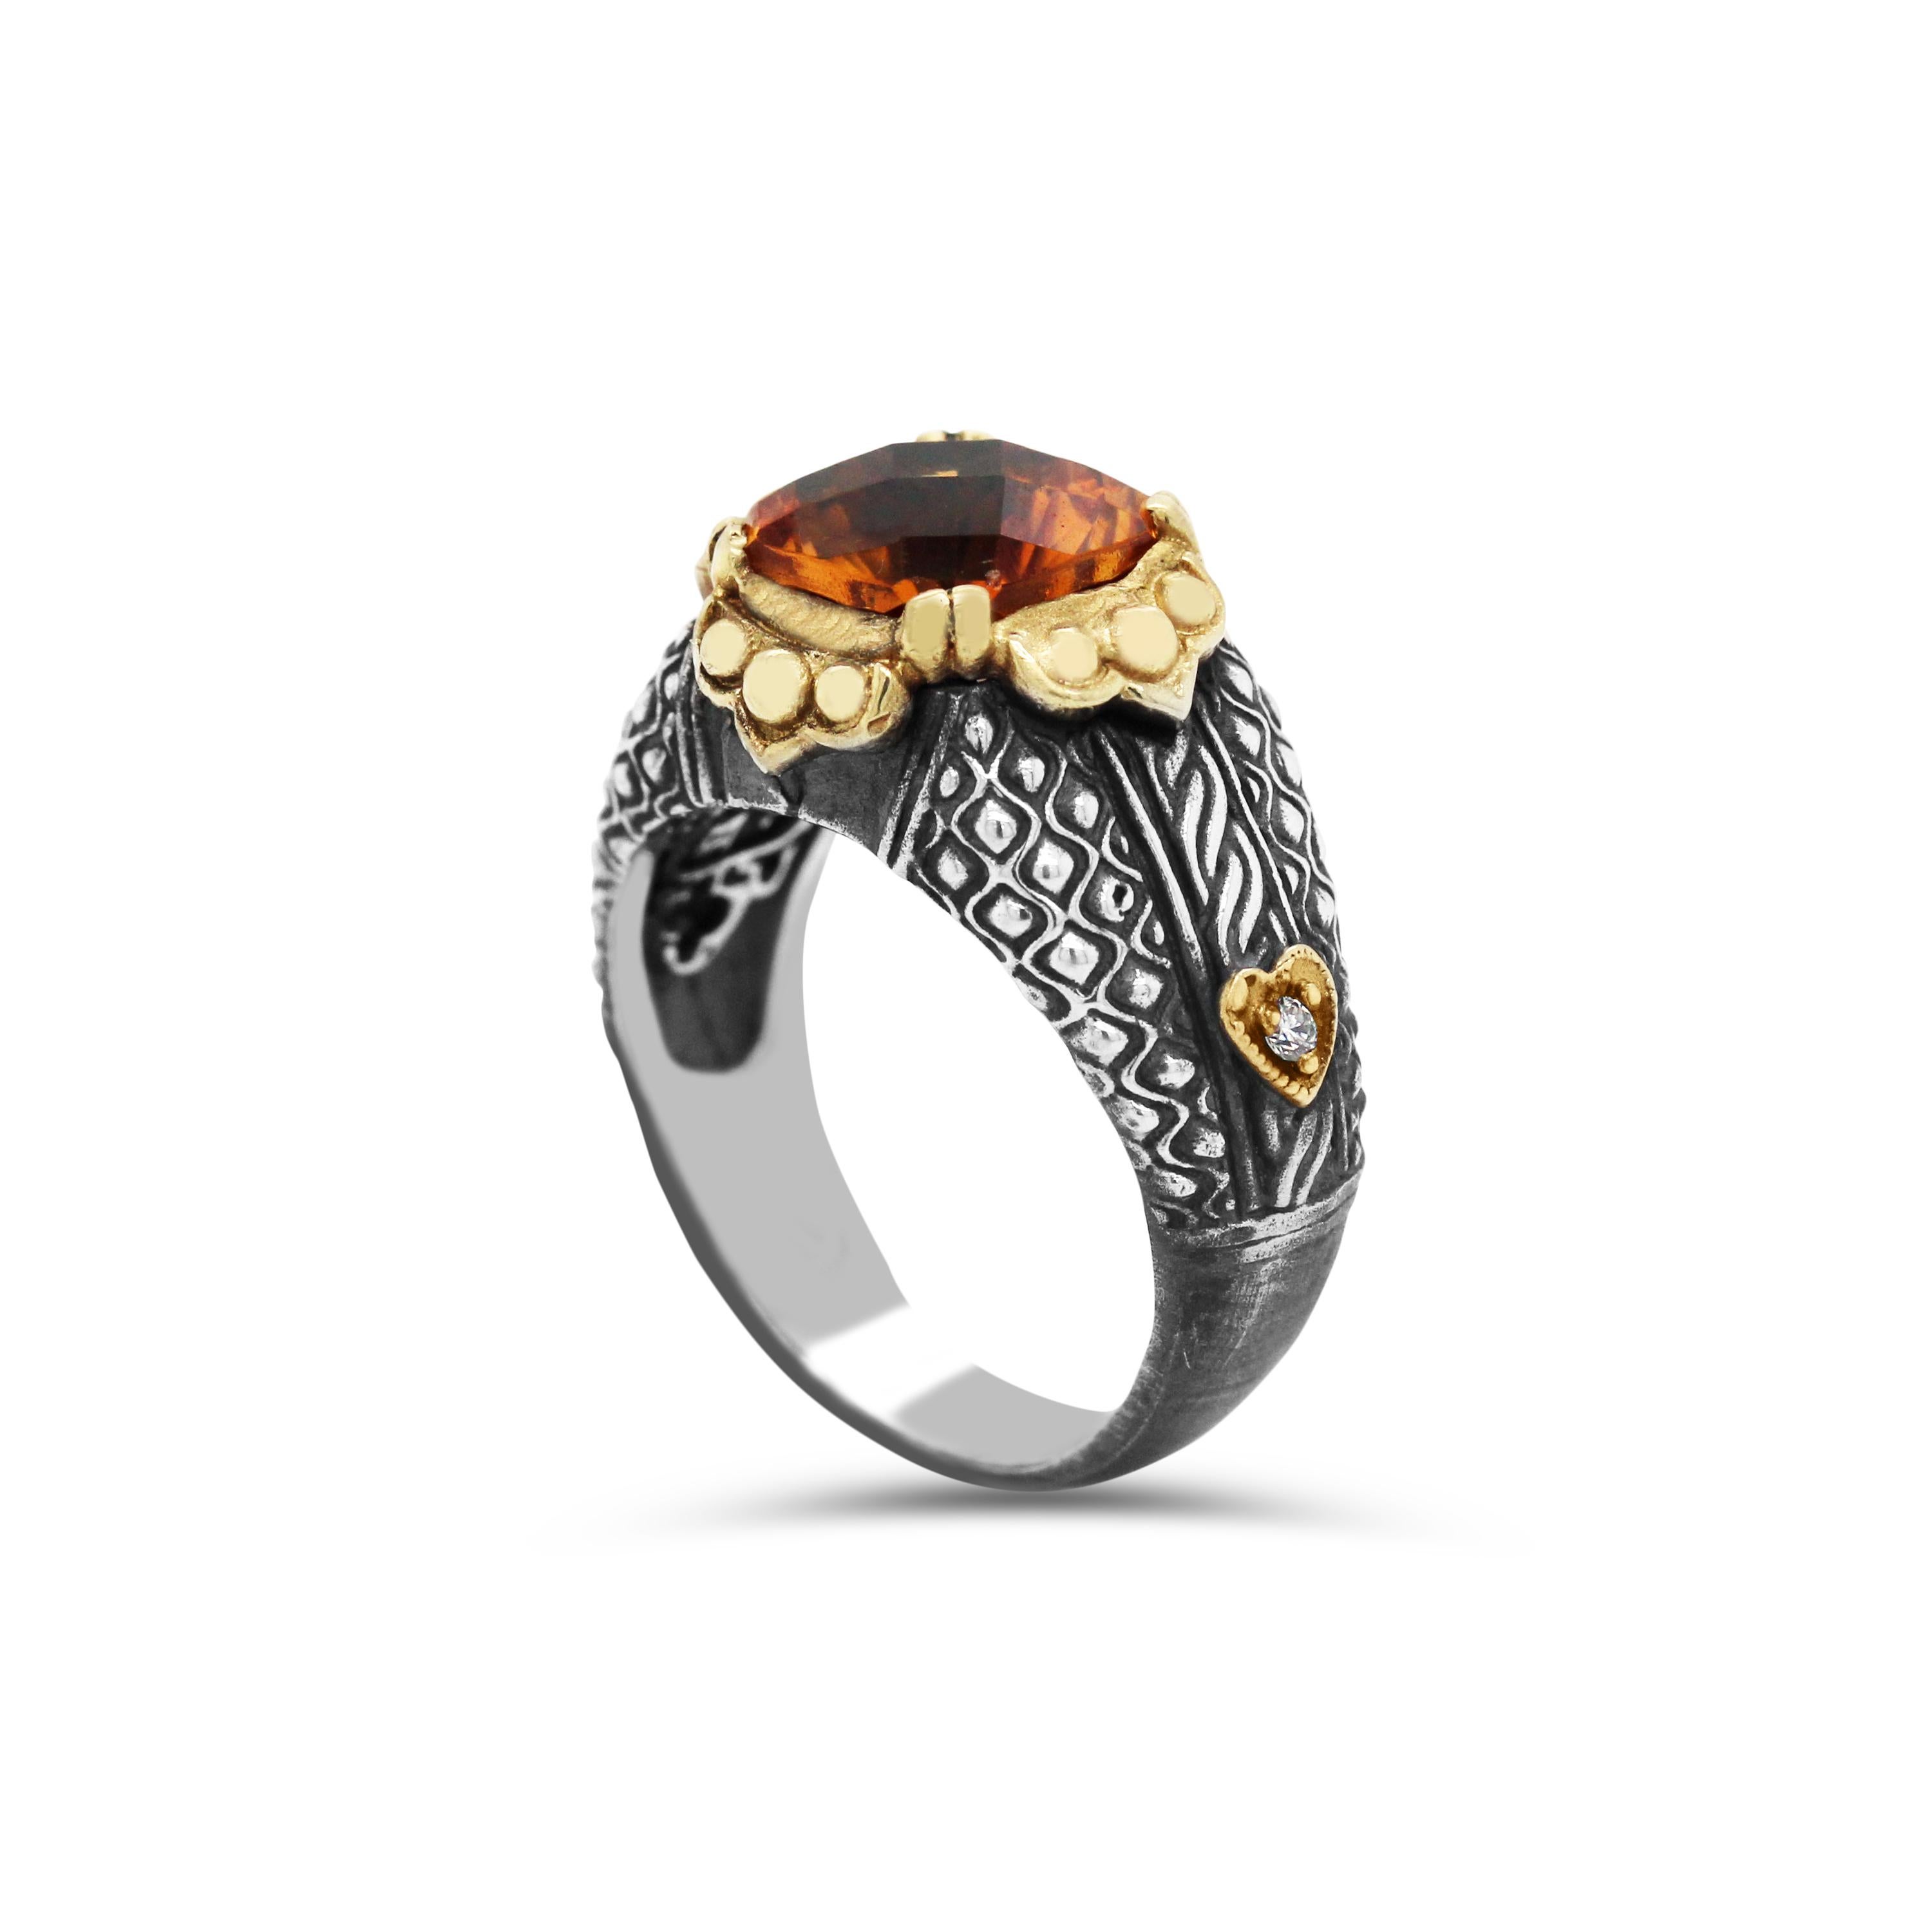 Aged Silver & 18K Gold Cocktail Ring with Citrine center by Stambolian

This unique ring is from the 